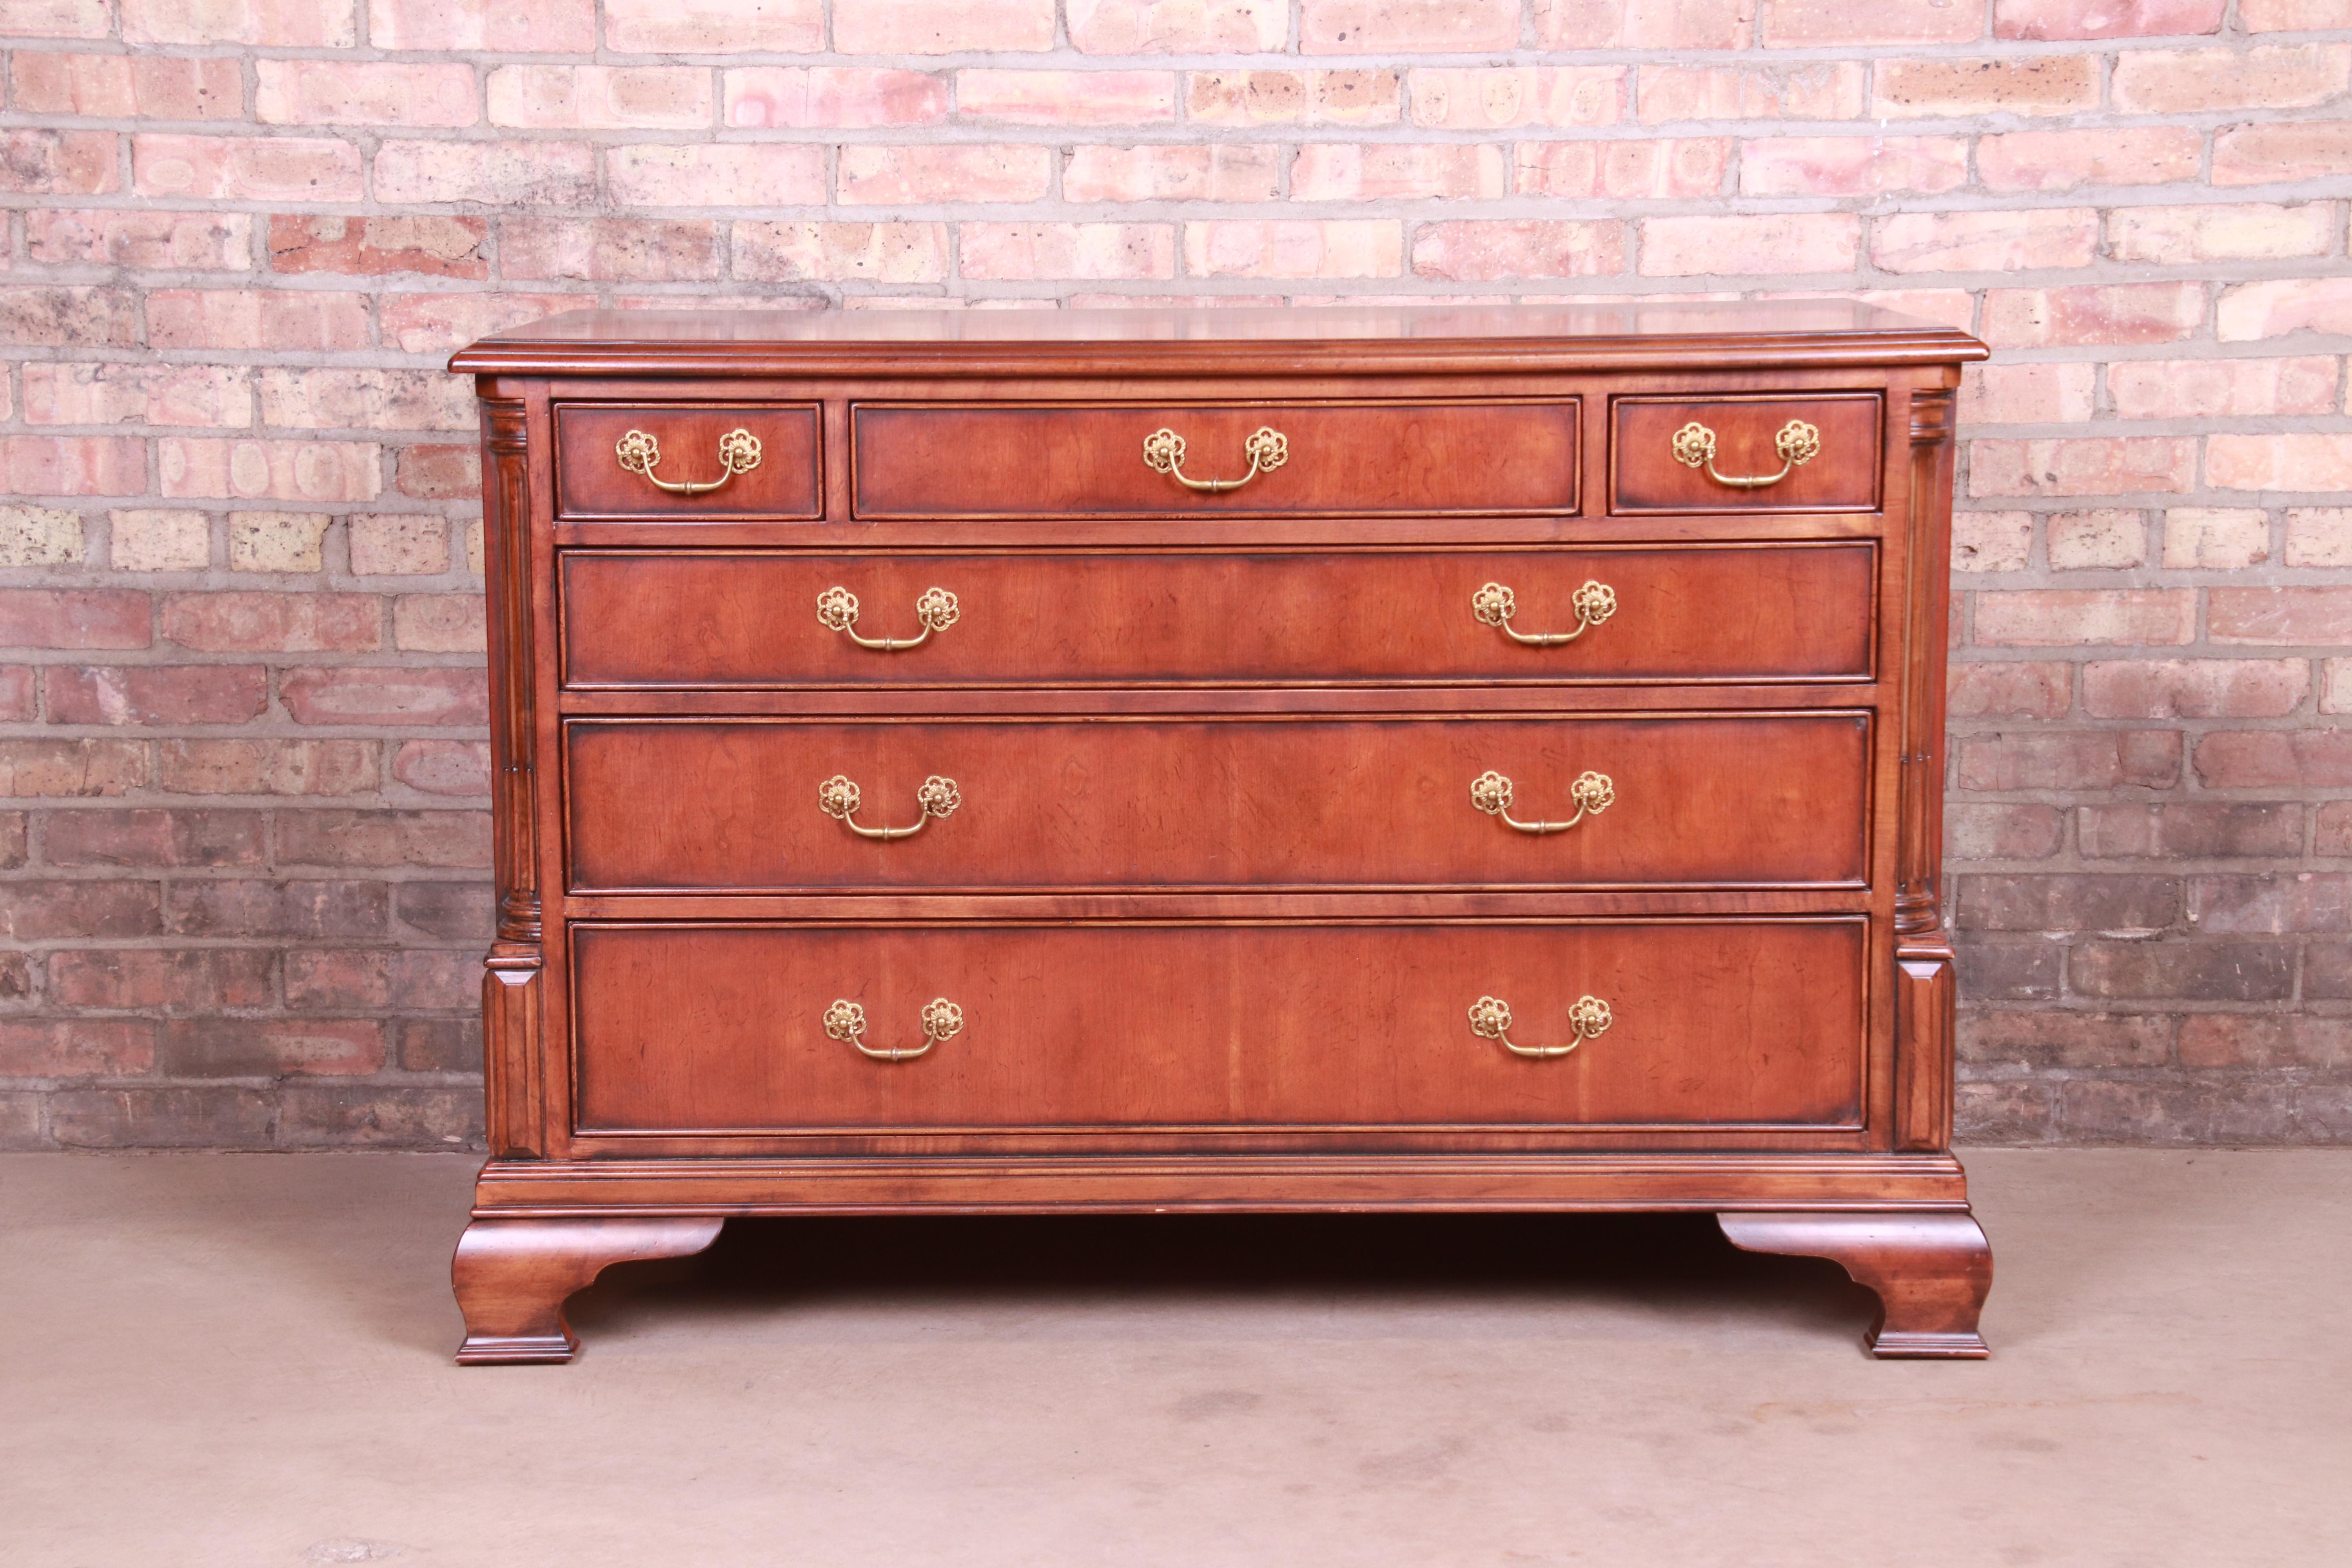 An exceptional Georgian or Chippendale style six-drawer dresser chest or commode

By Ralph Lauren for Henredon

Late 20th century

Carved cherry wood, with original brass hardware.

Measures: 48.25